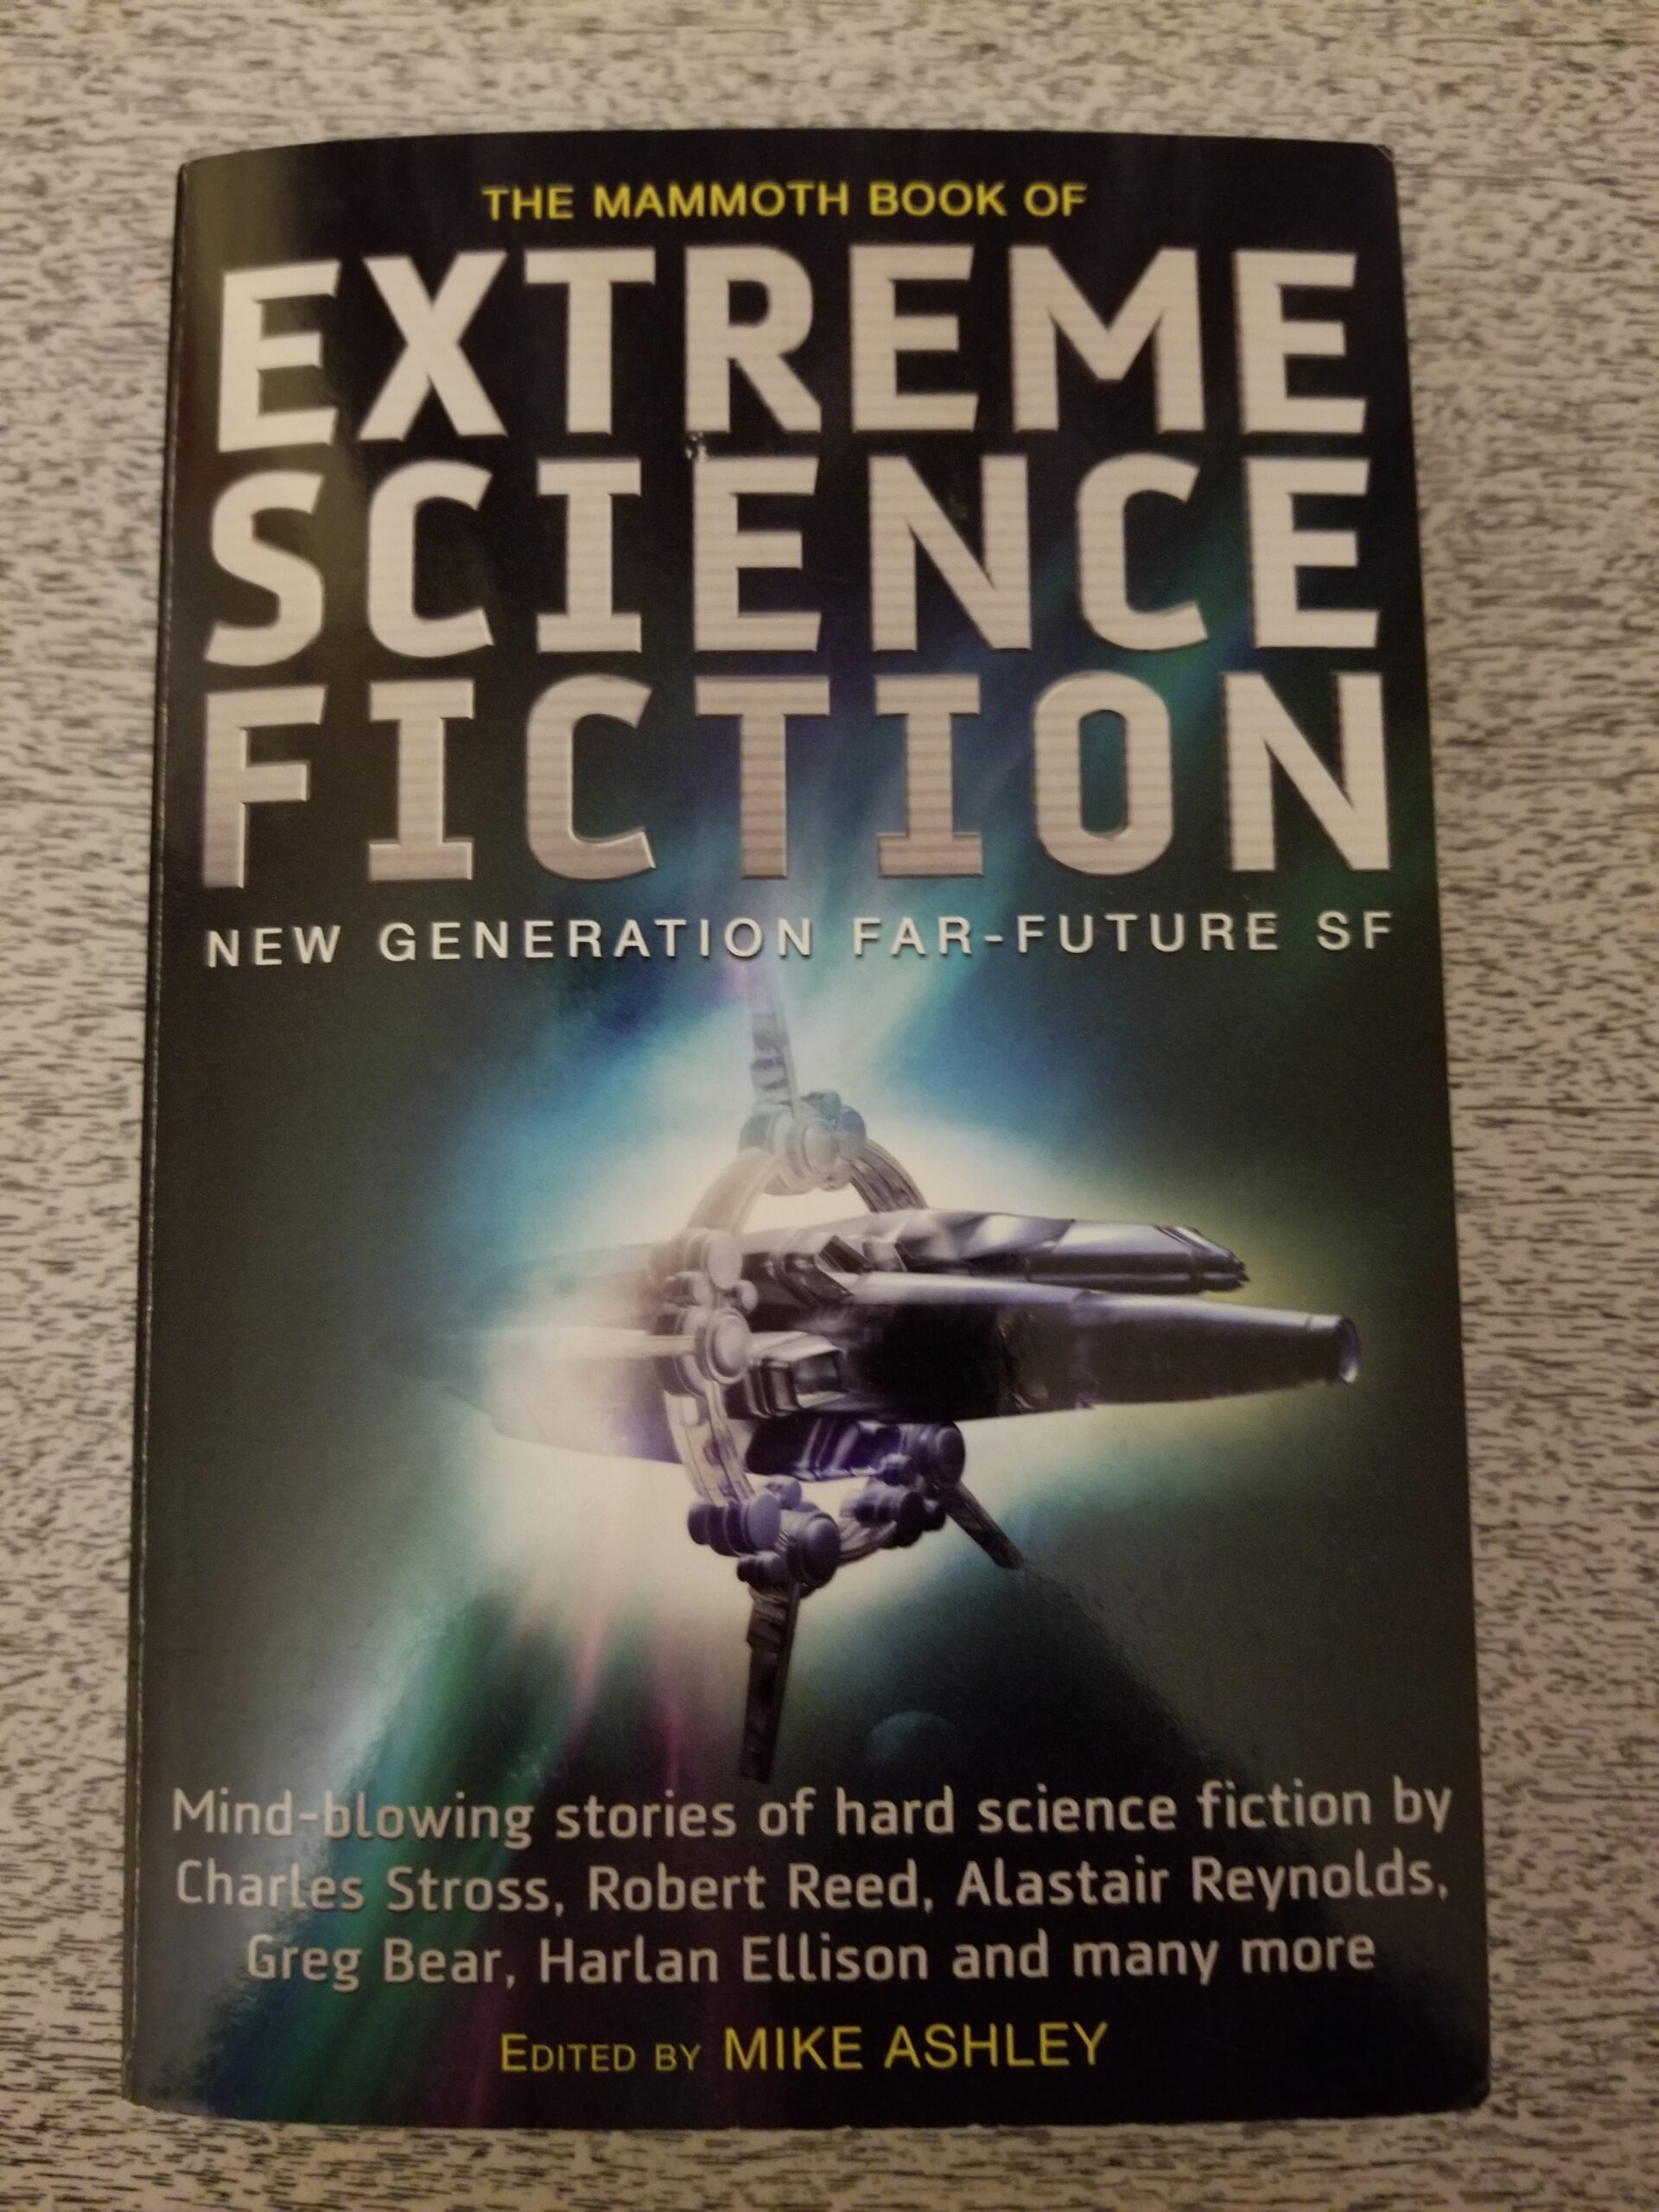 The Mammoth Book of Extreme Science Fiction by Mike Ashley, ed.